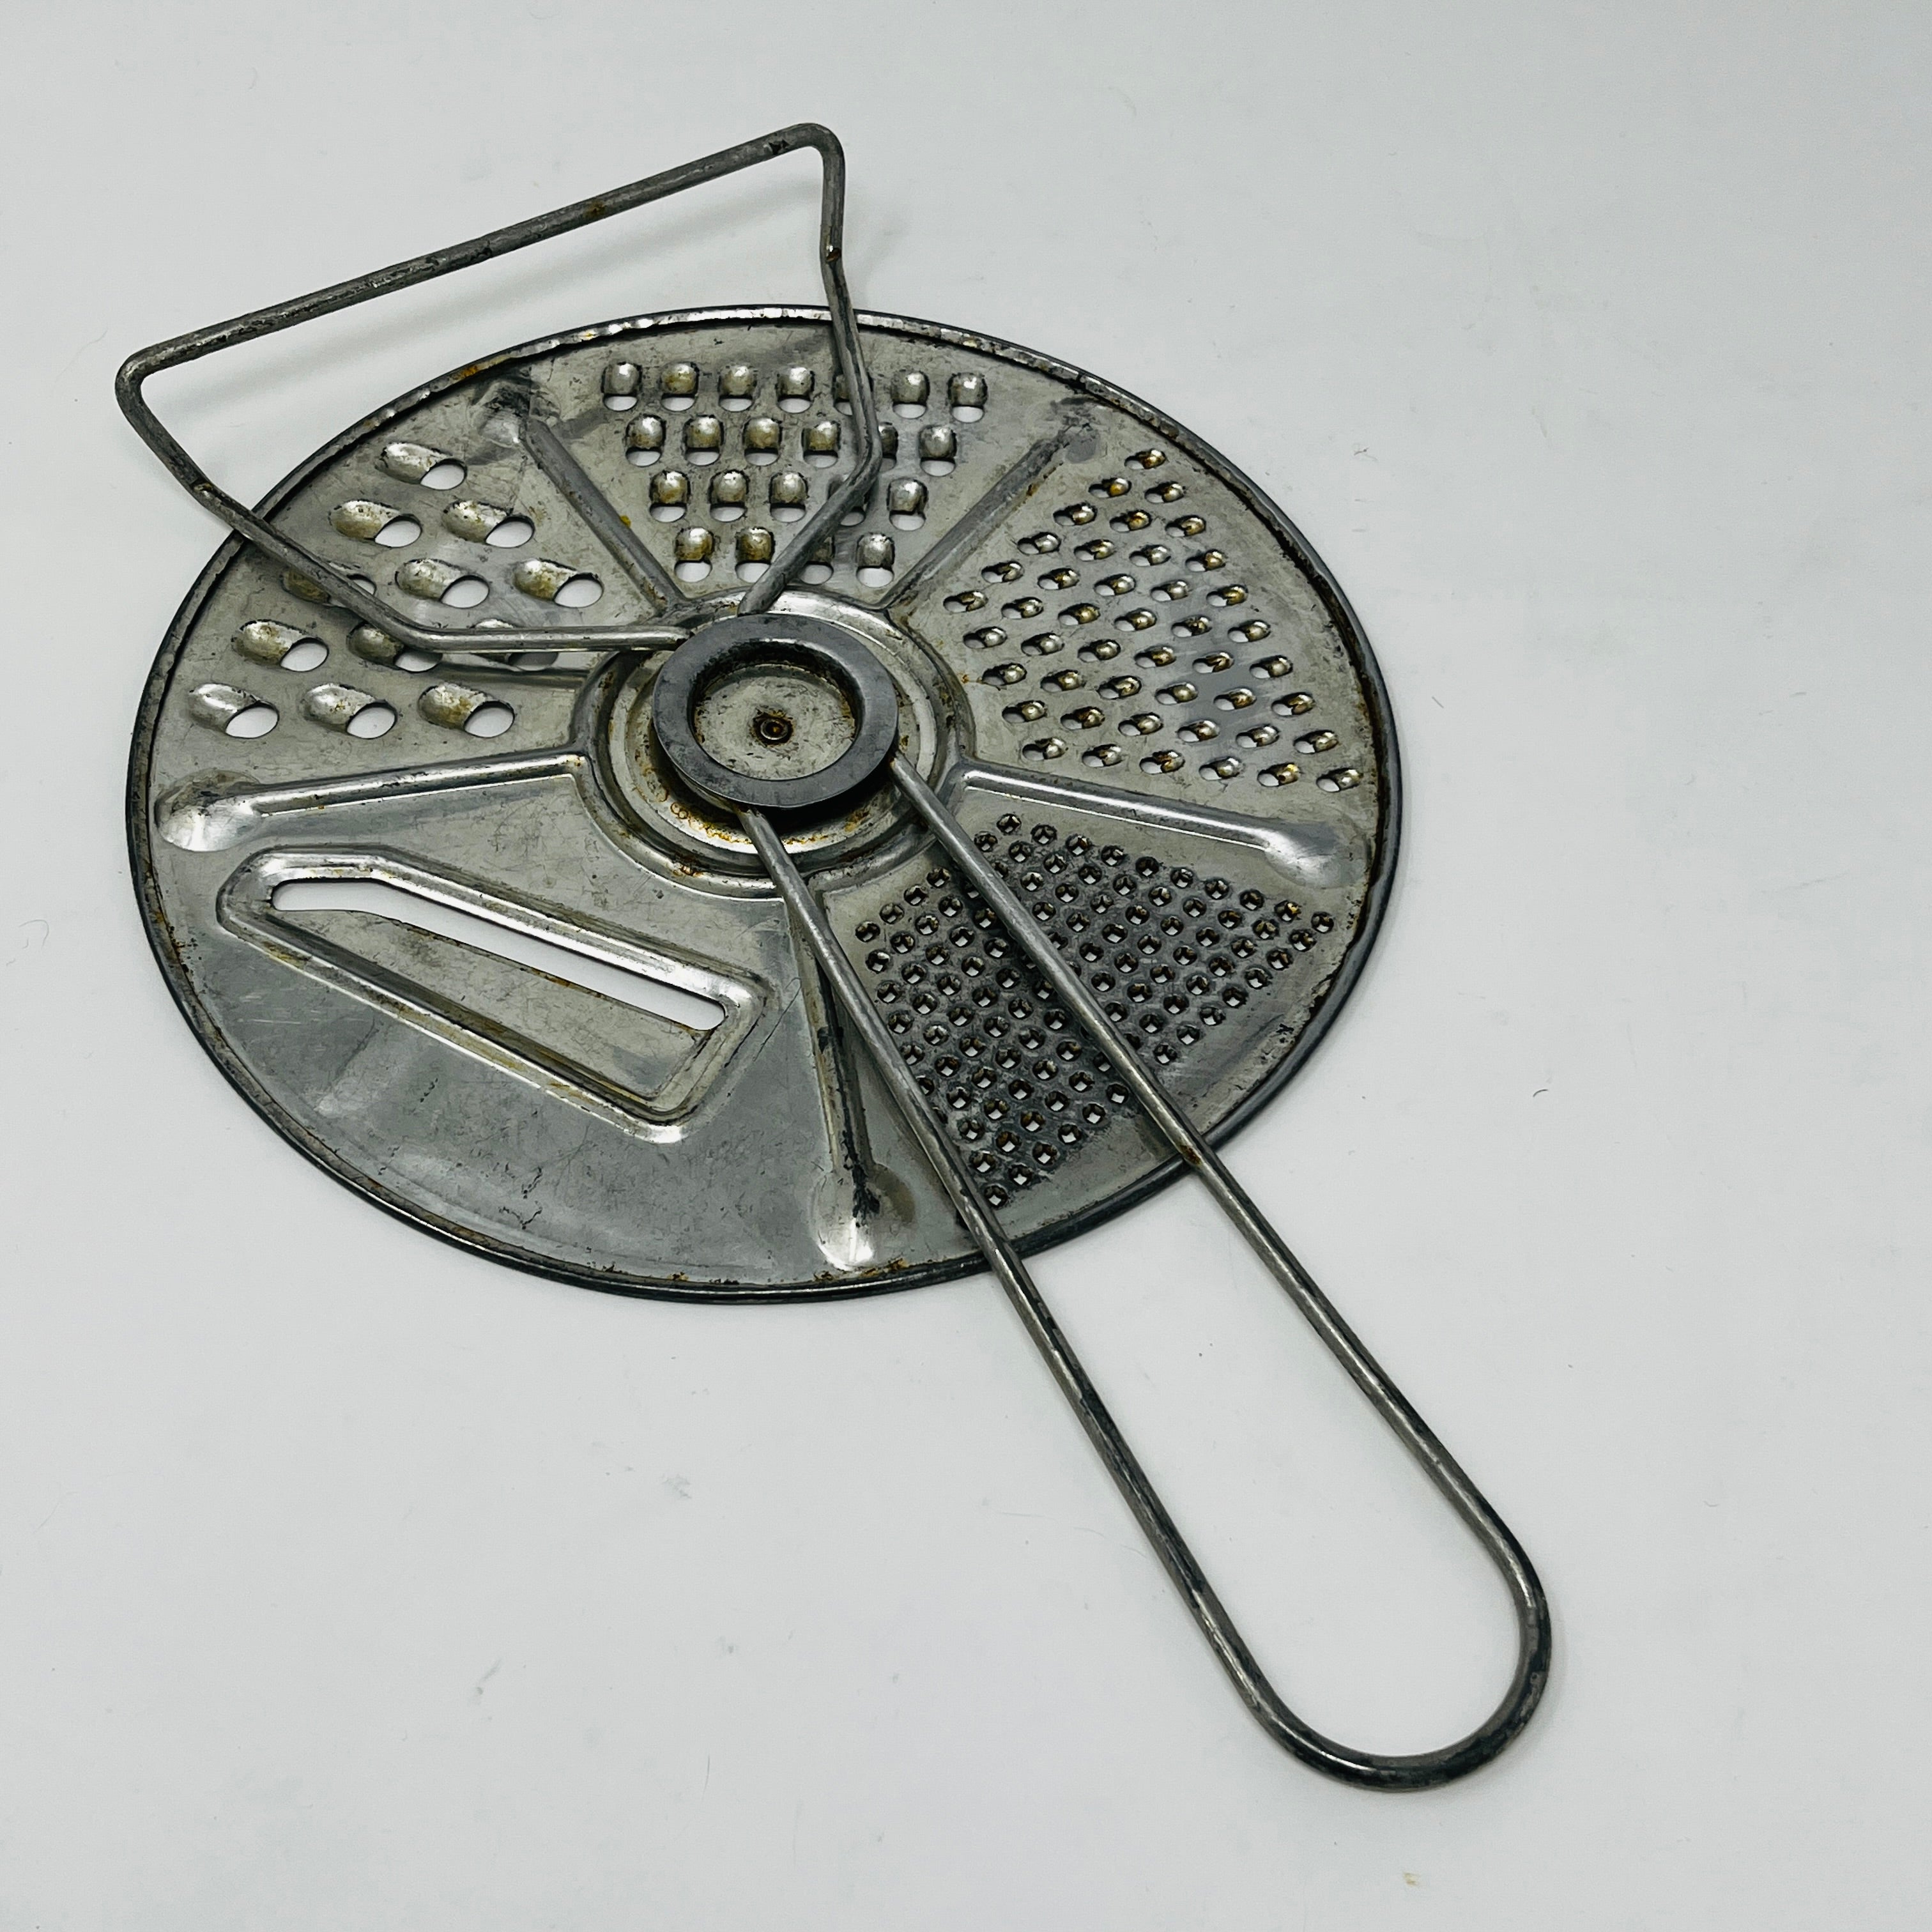 Small Hand Grater Vintage Kitchen Grater Old Hand Crank 